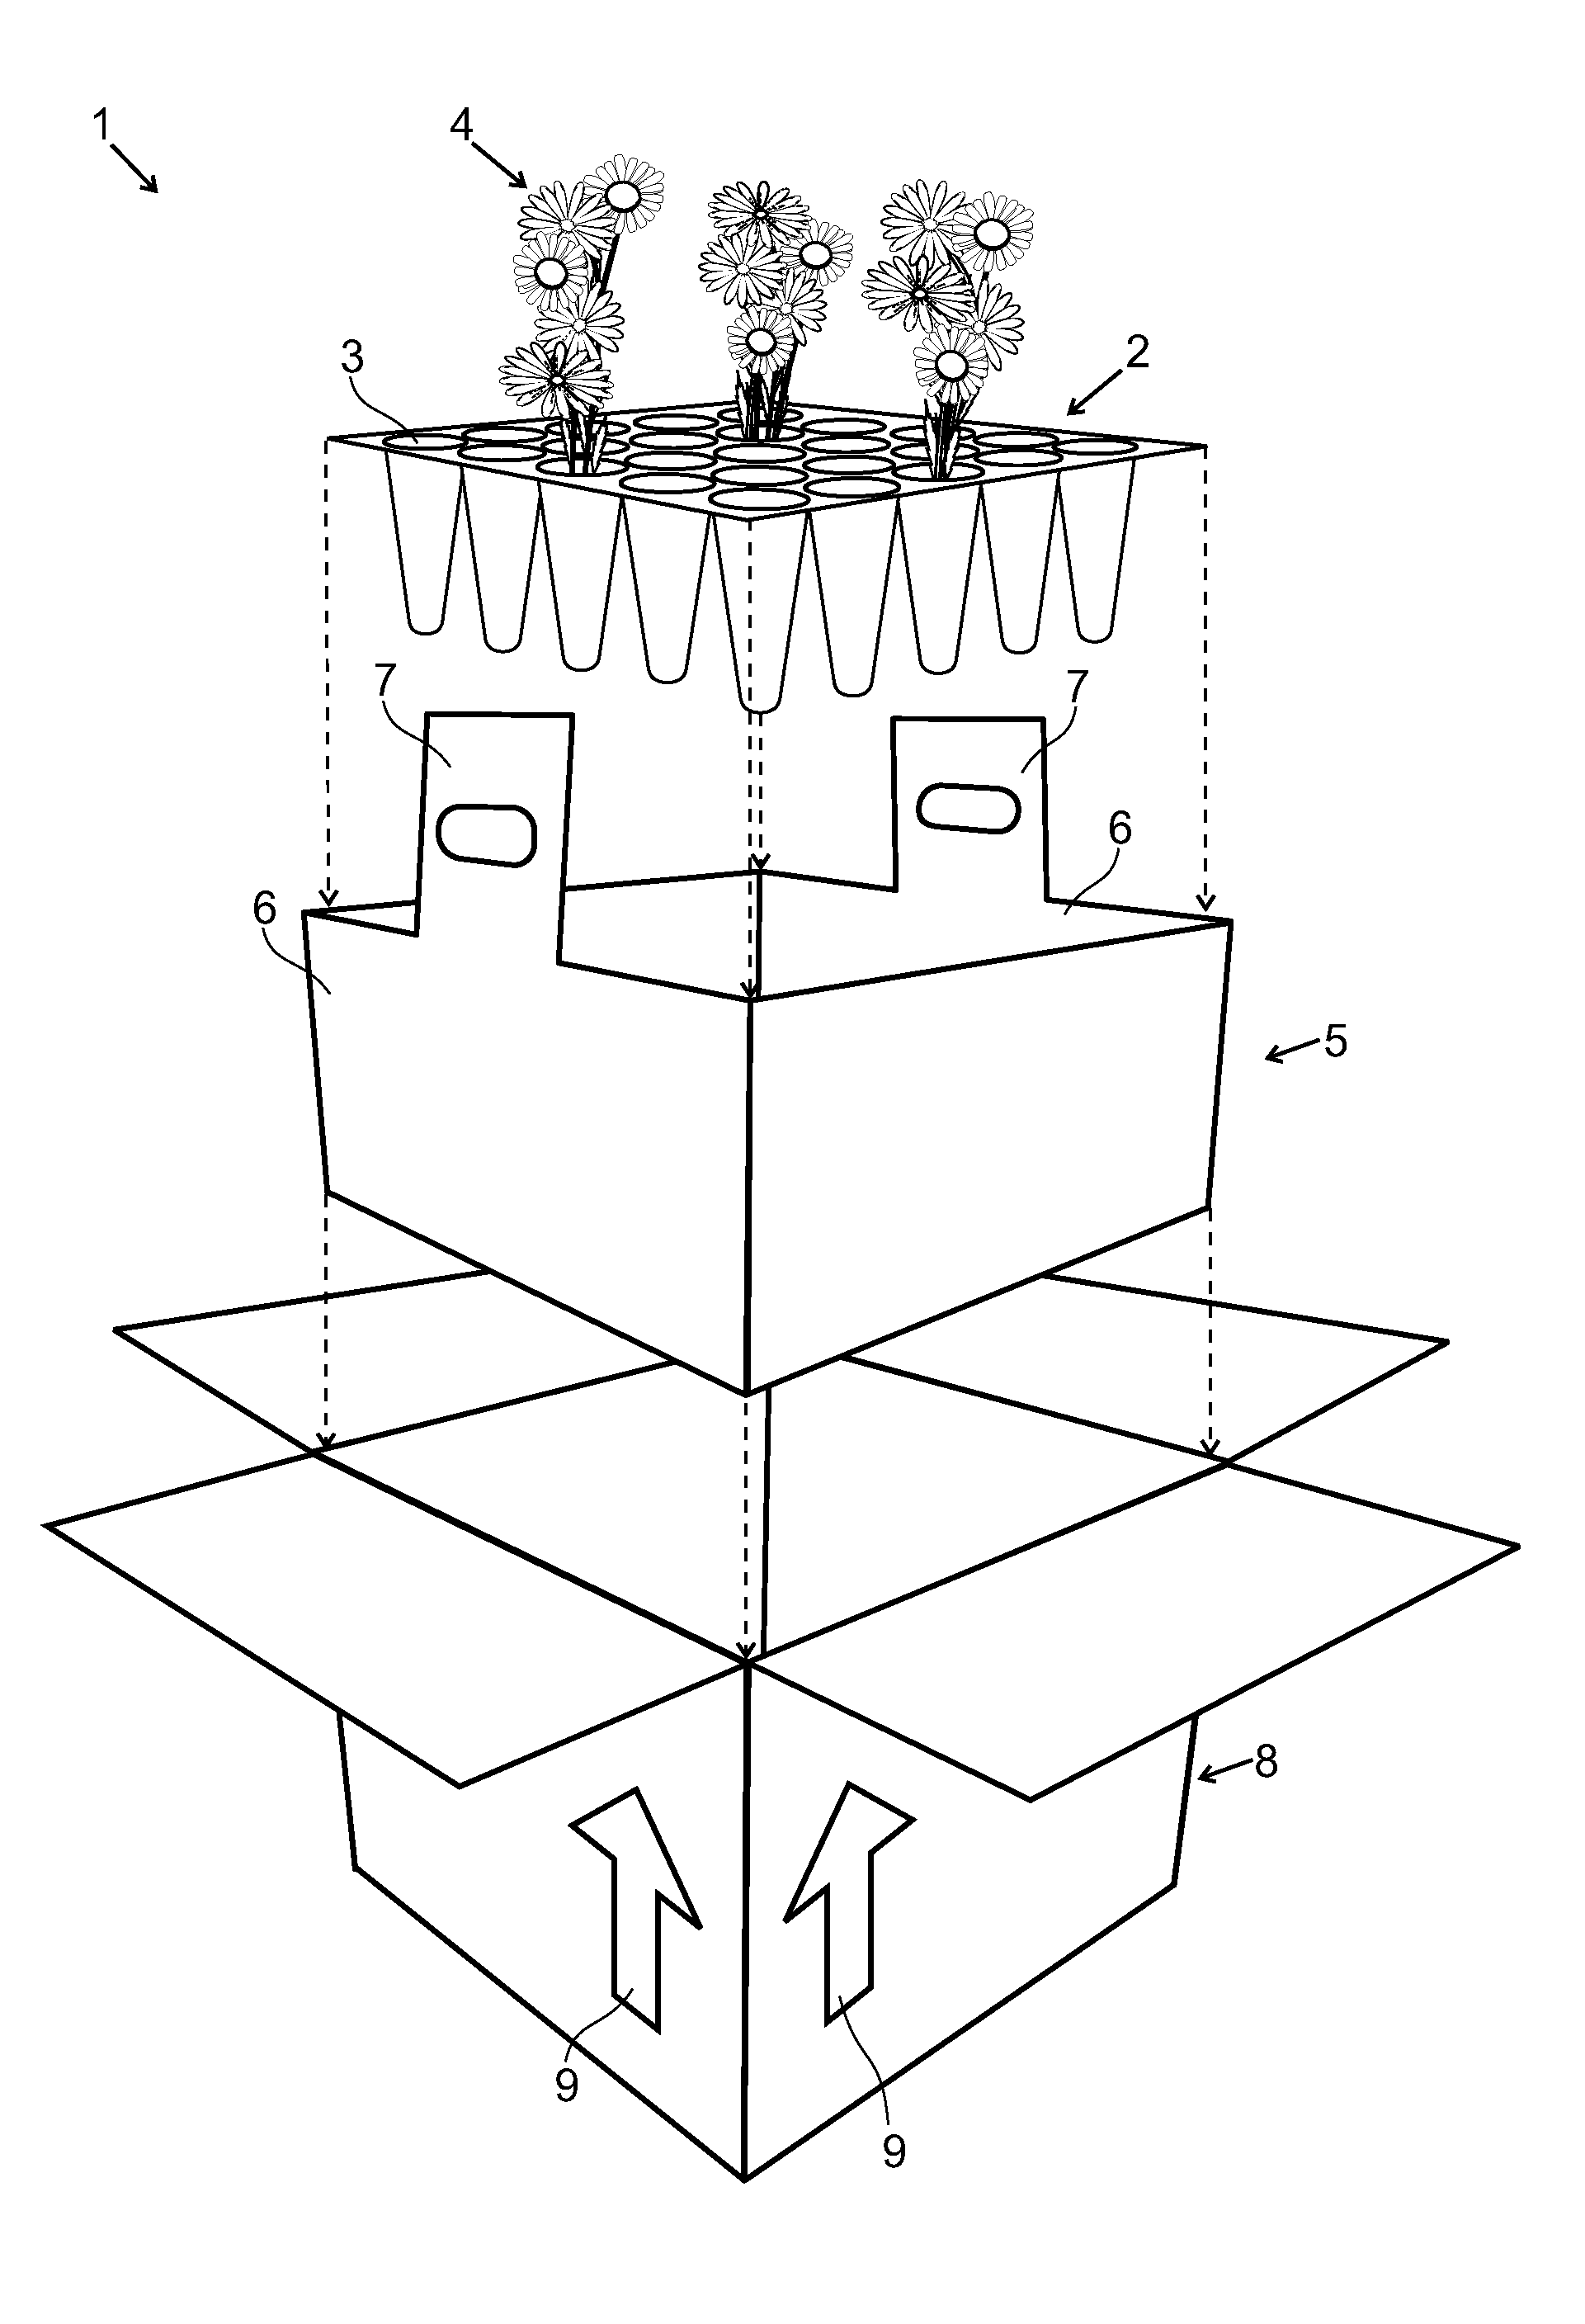 Assemblies, Systems and Methods for the Transportation and Display of Plants and Flowers